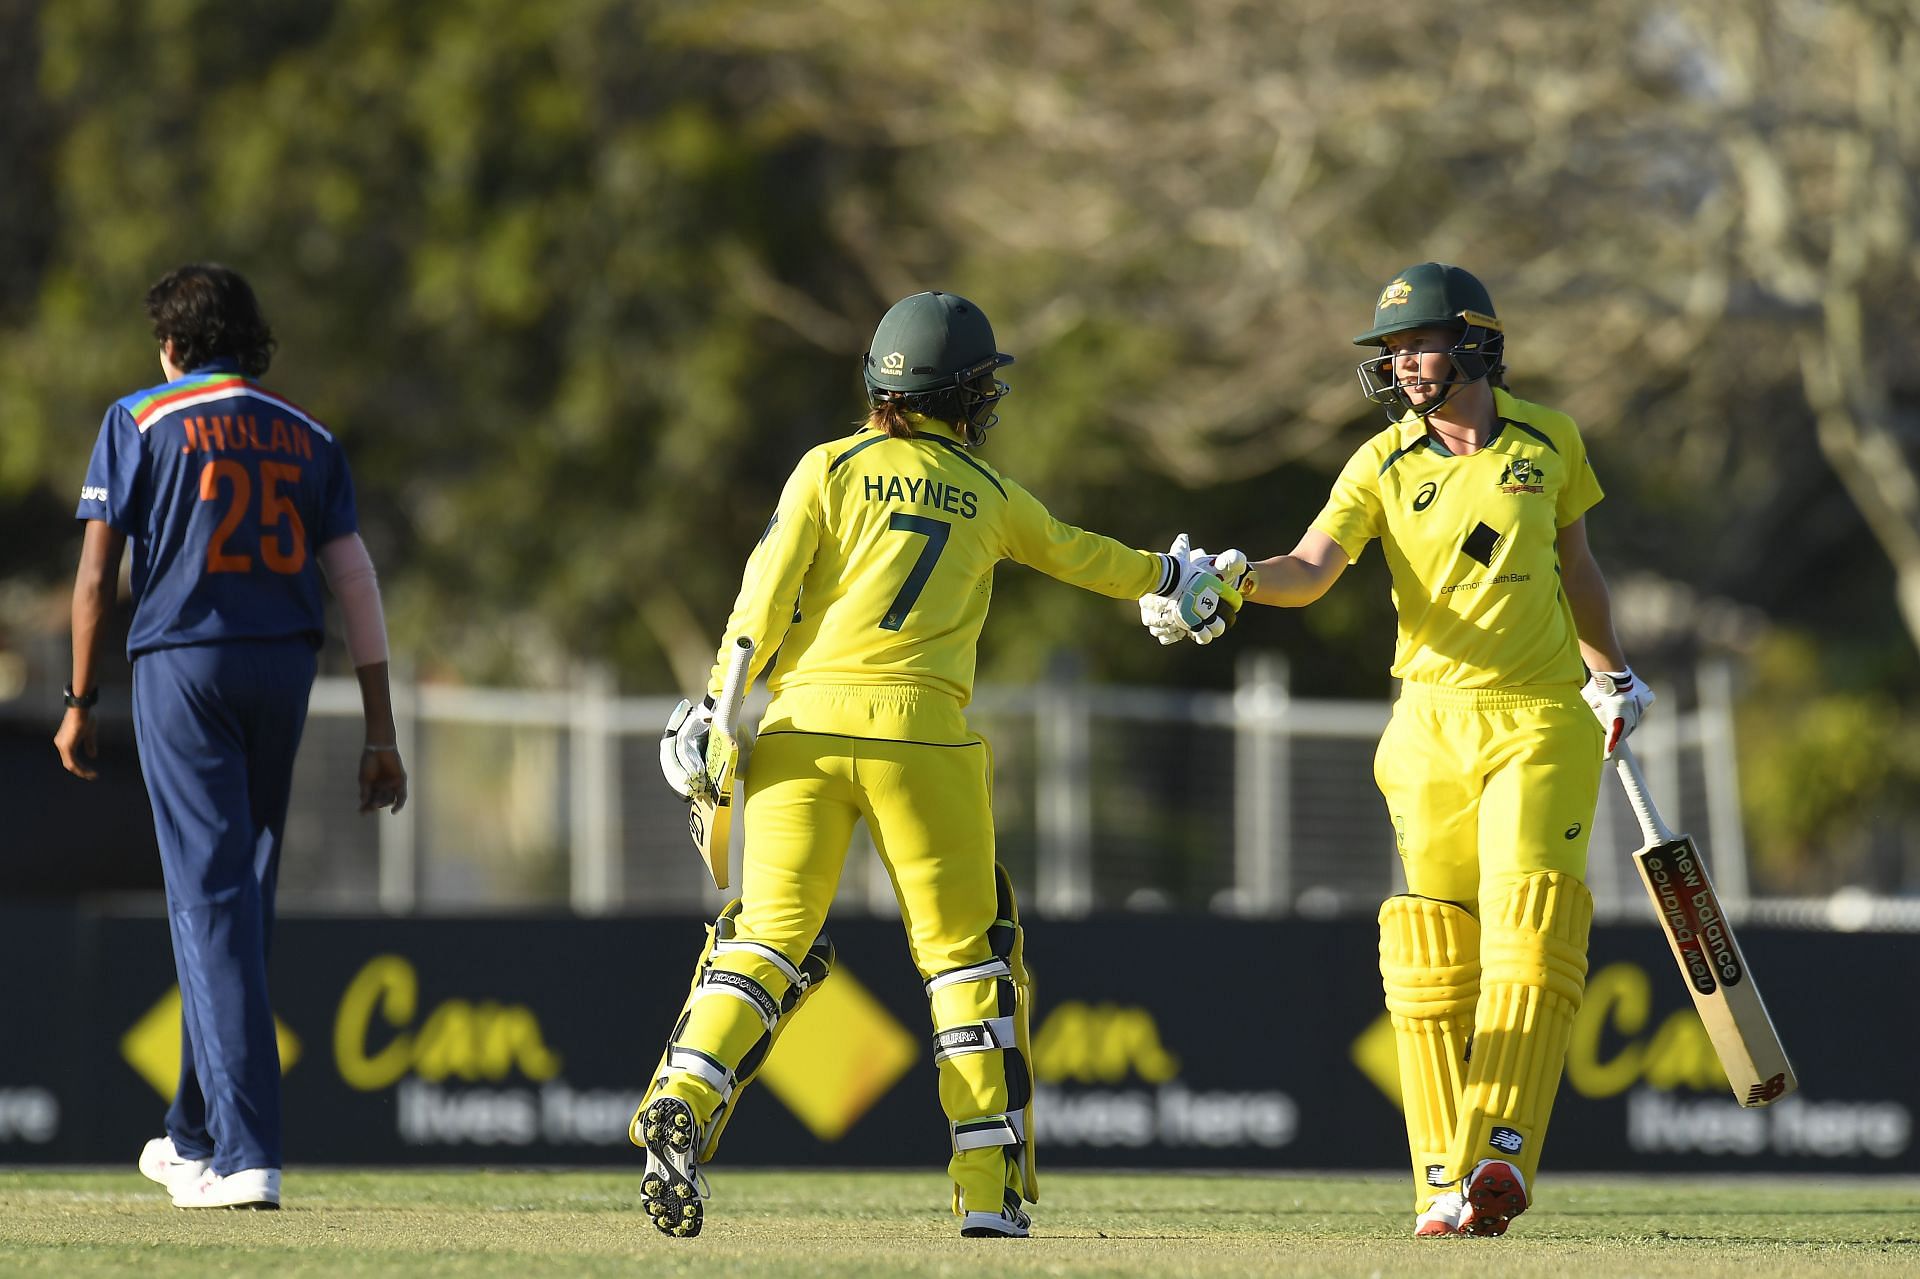 The Aussies chased down 225 in the first ODI quite comfortably.